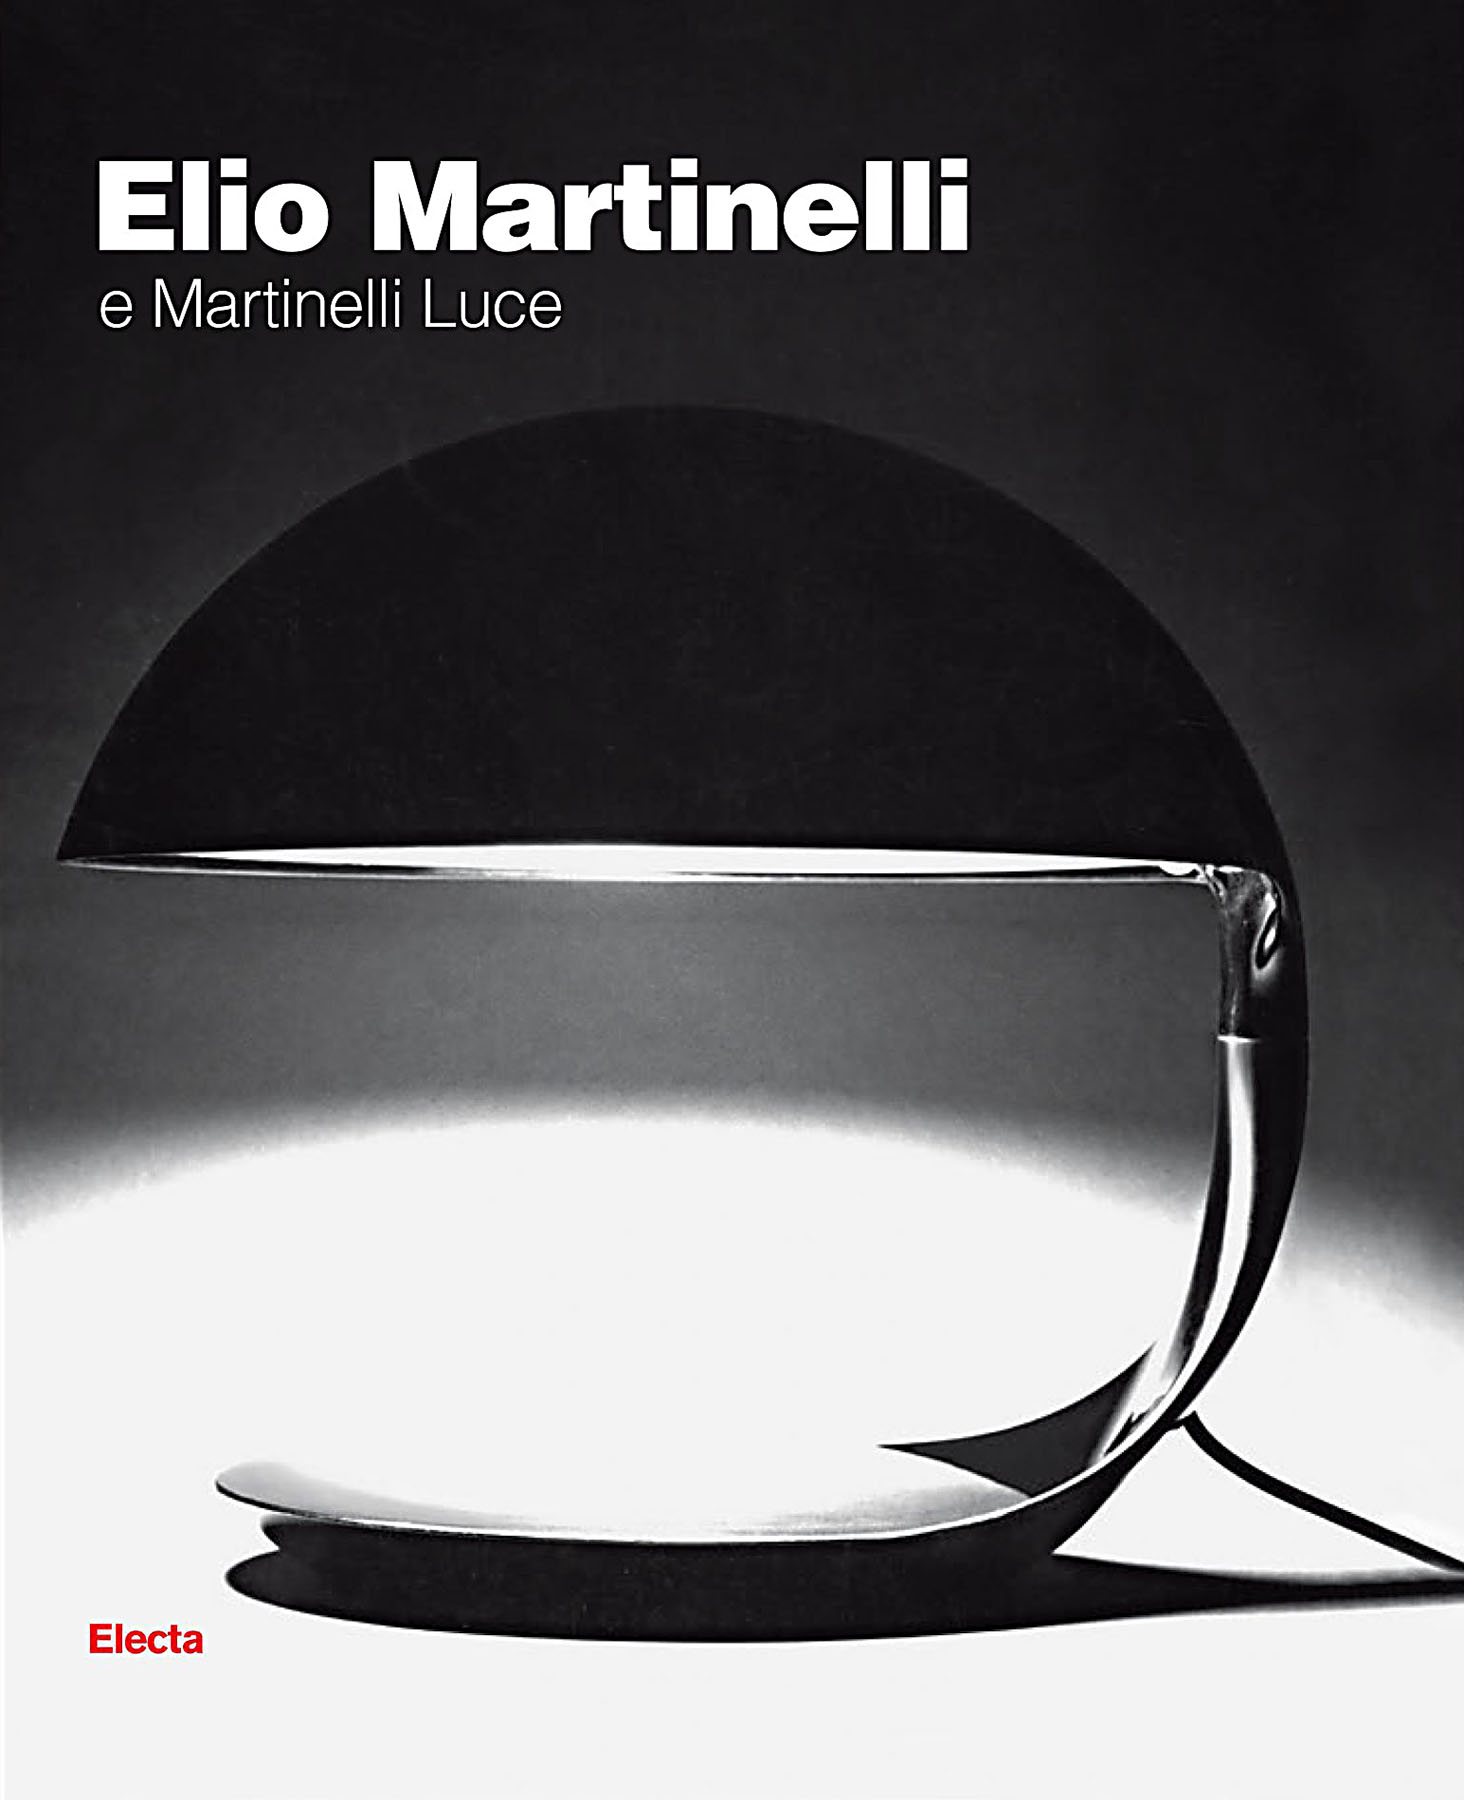 A book about Elio Martinelli and our history!